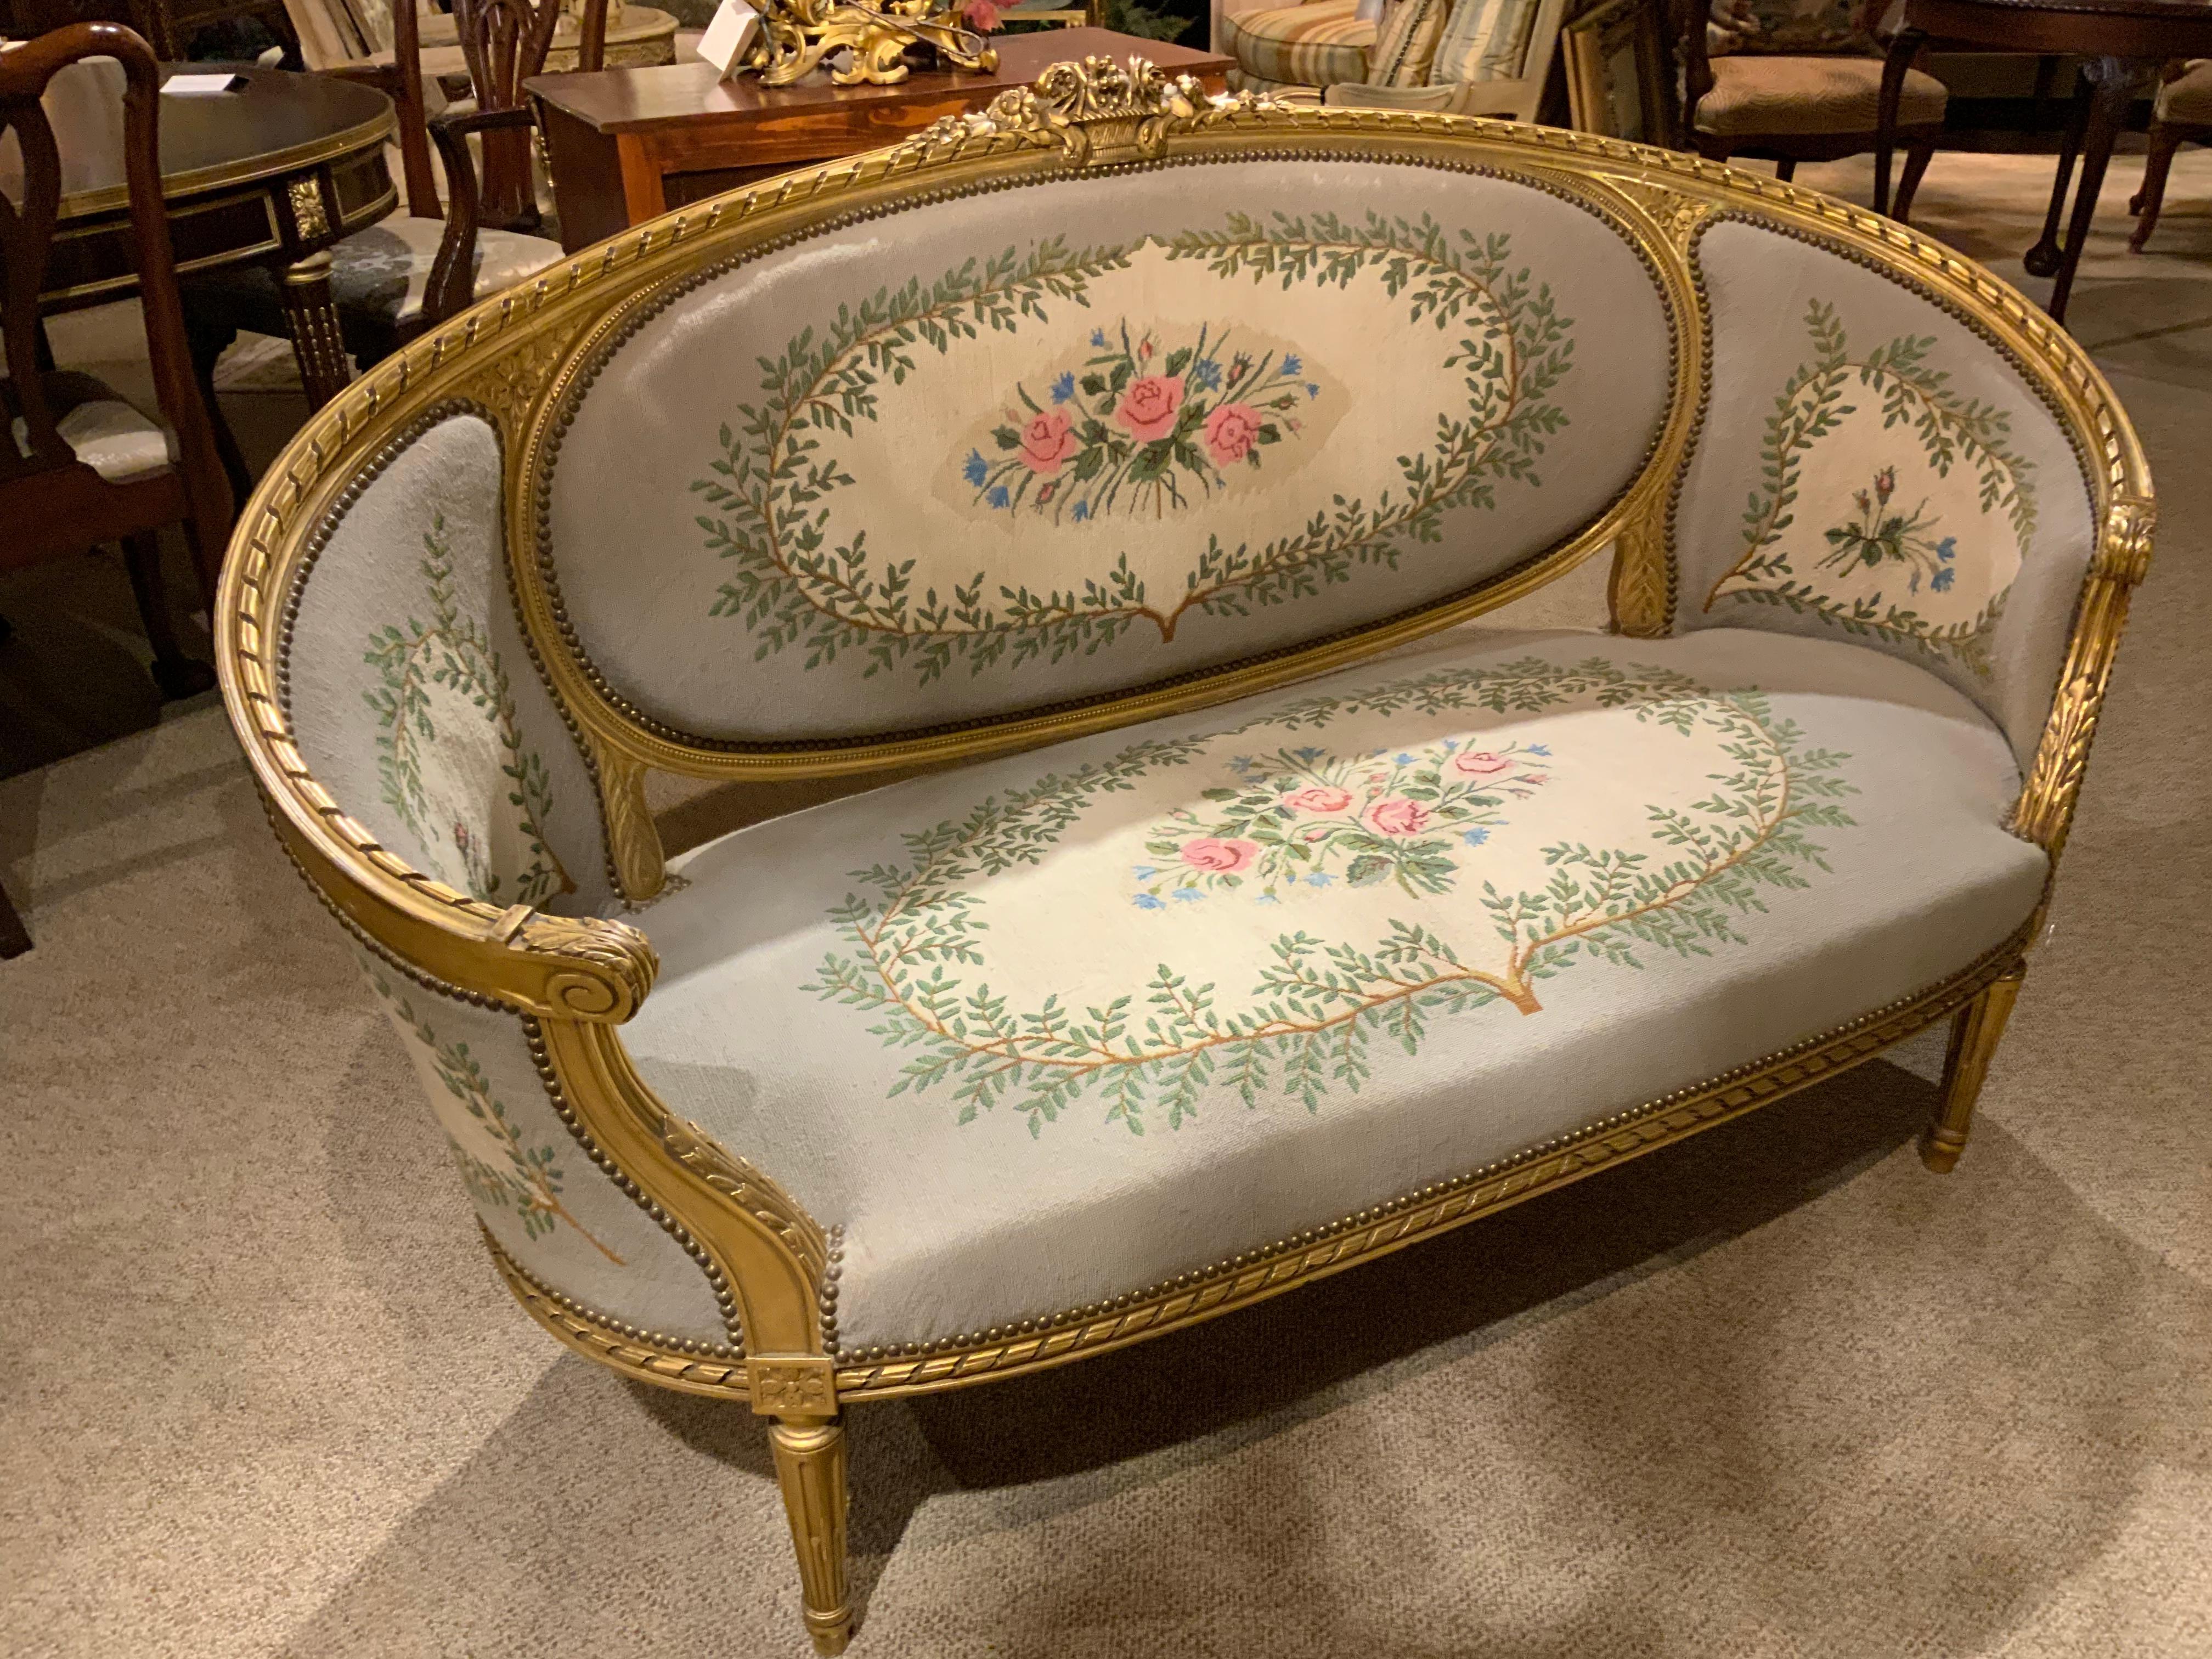 19th Century French Louis XVI-Style Gilt Wood Settee/Canapé  with Needlepoint